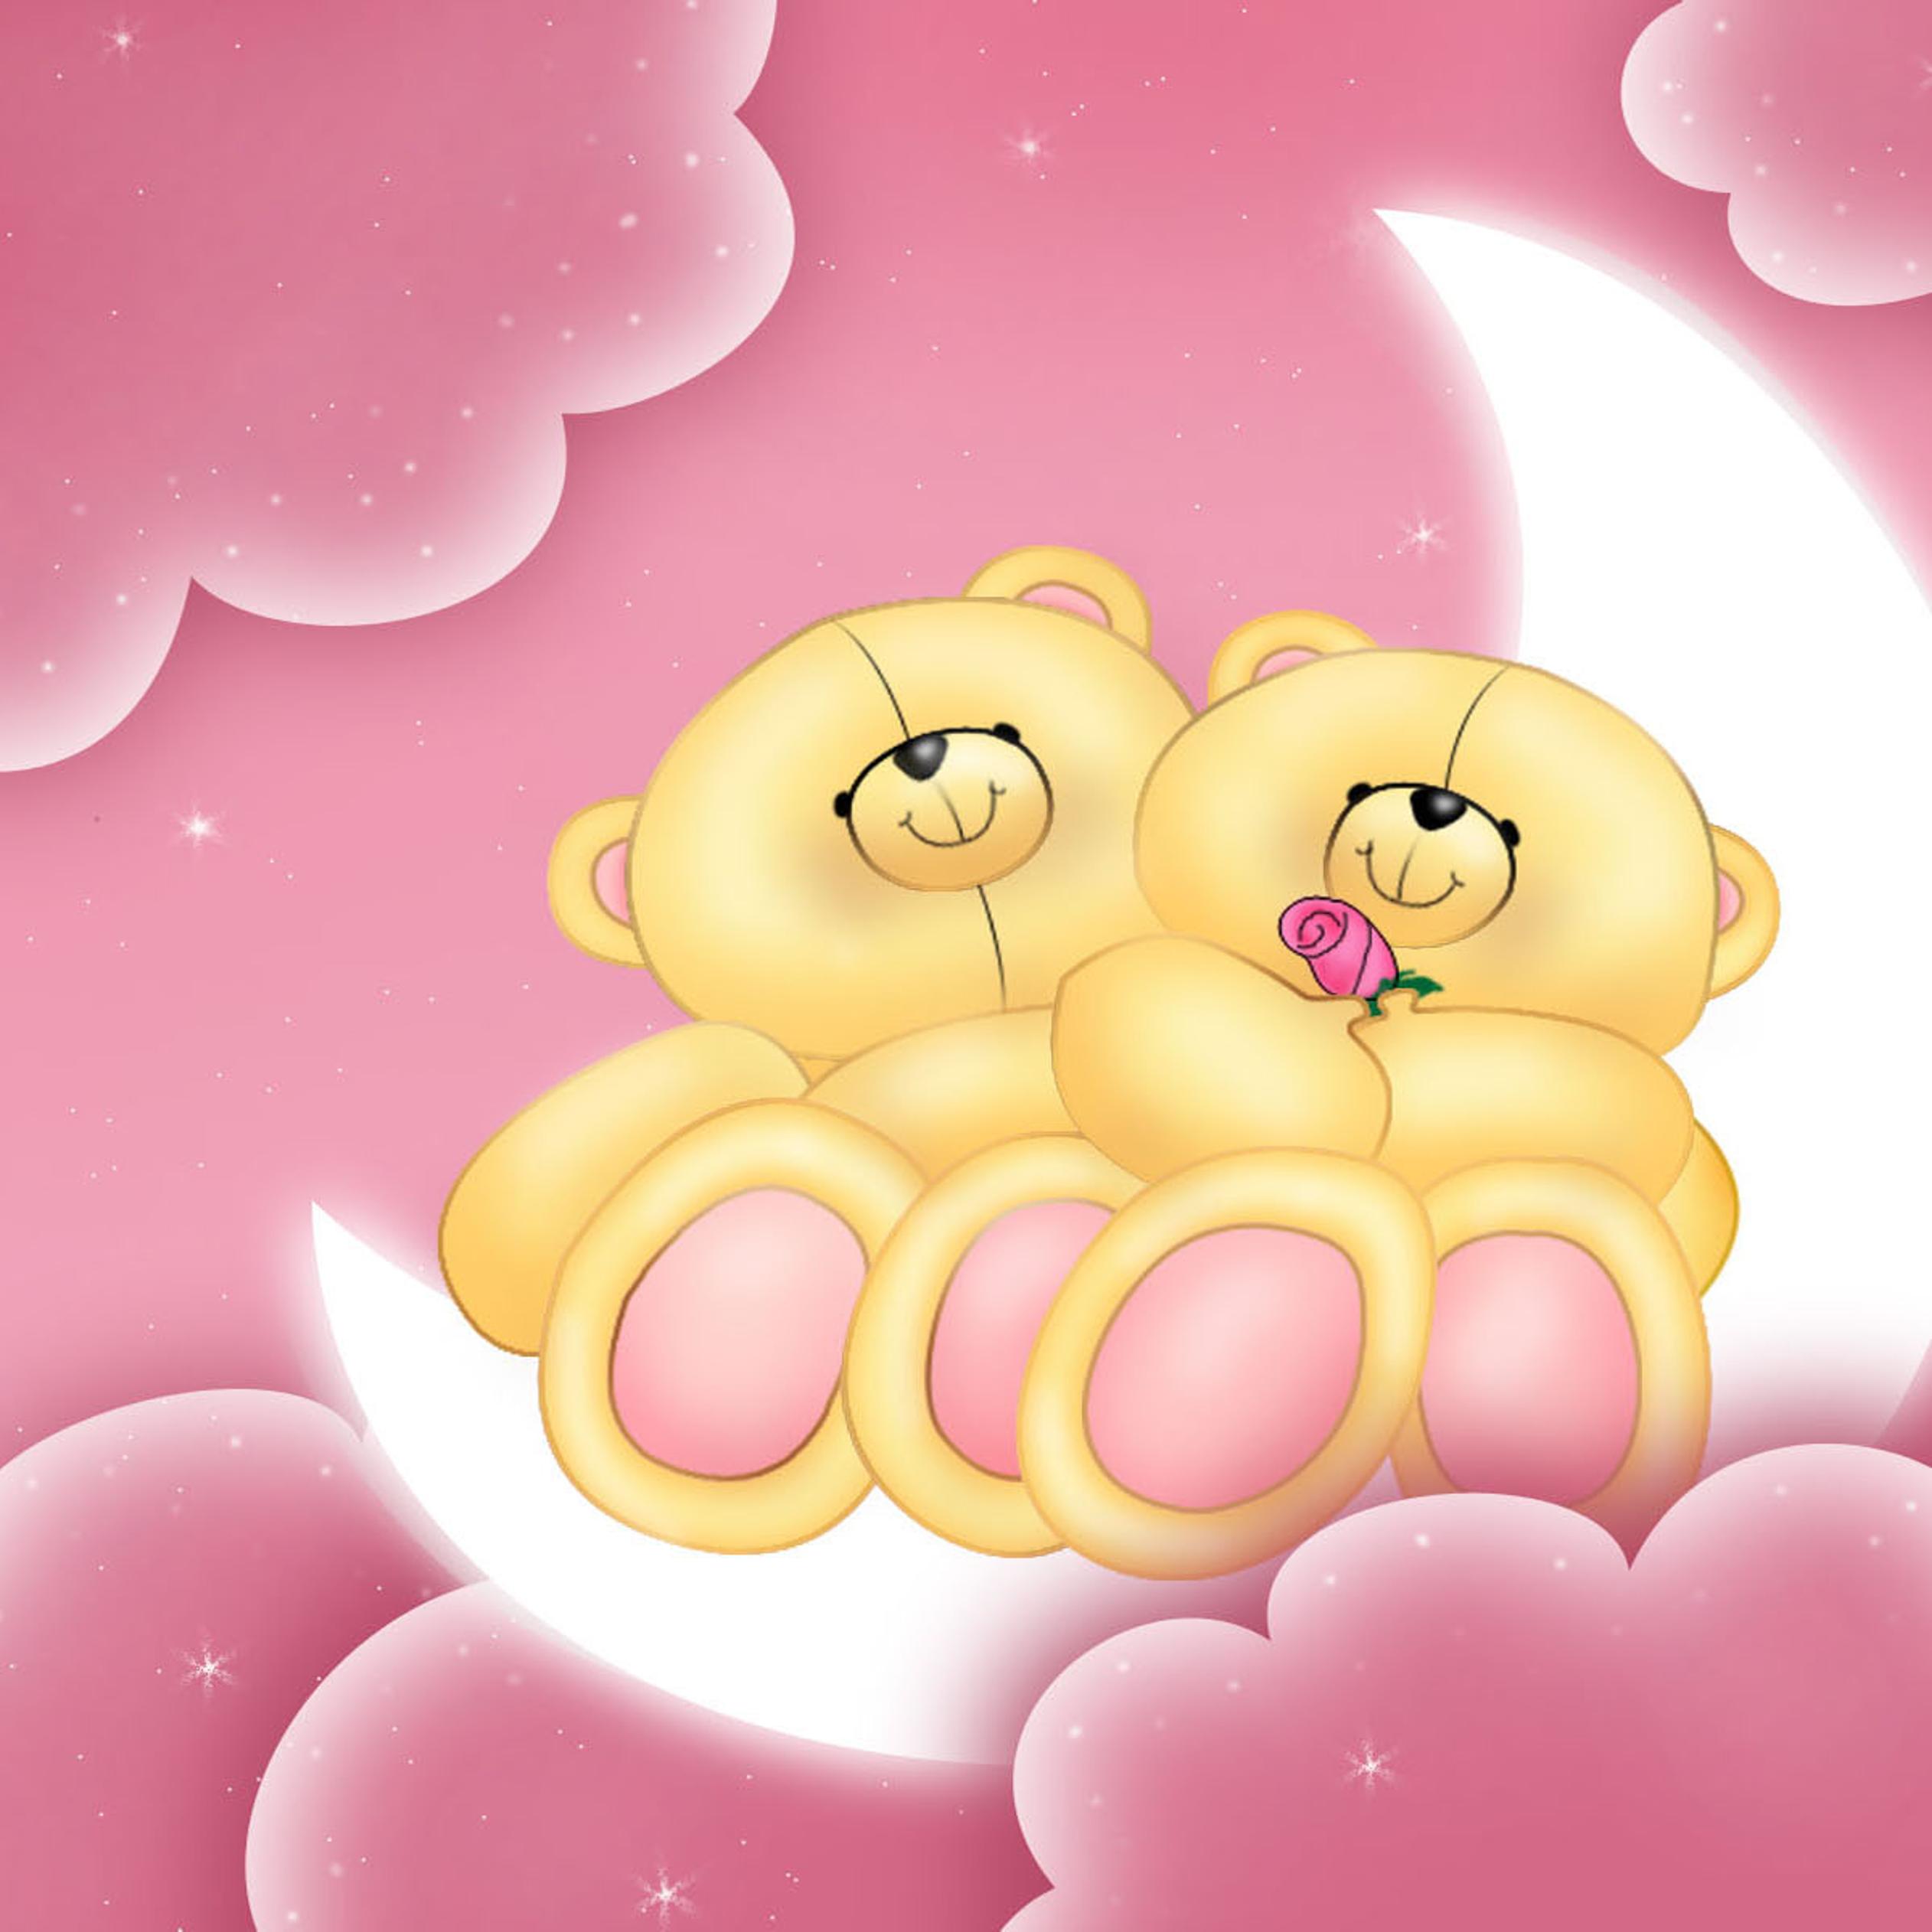 Love is in the air bears stay on moon- Valentine's Day